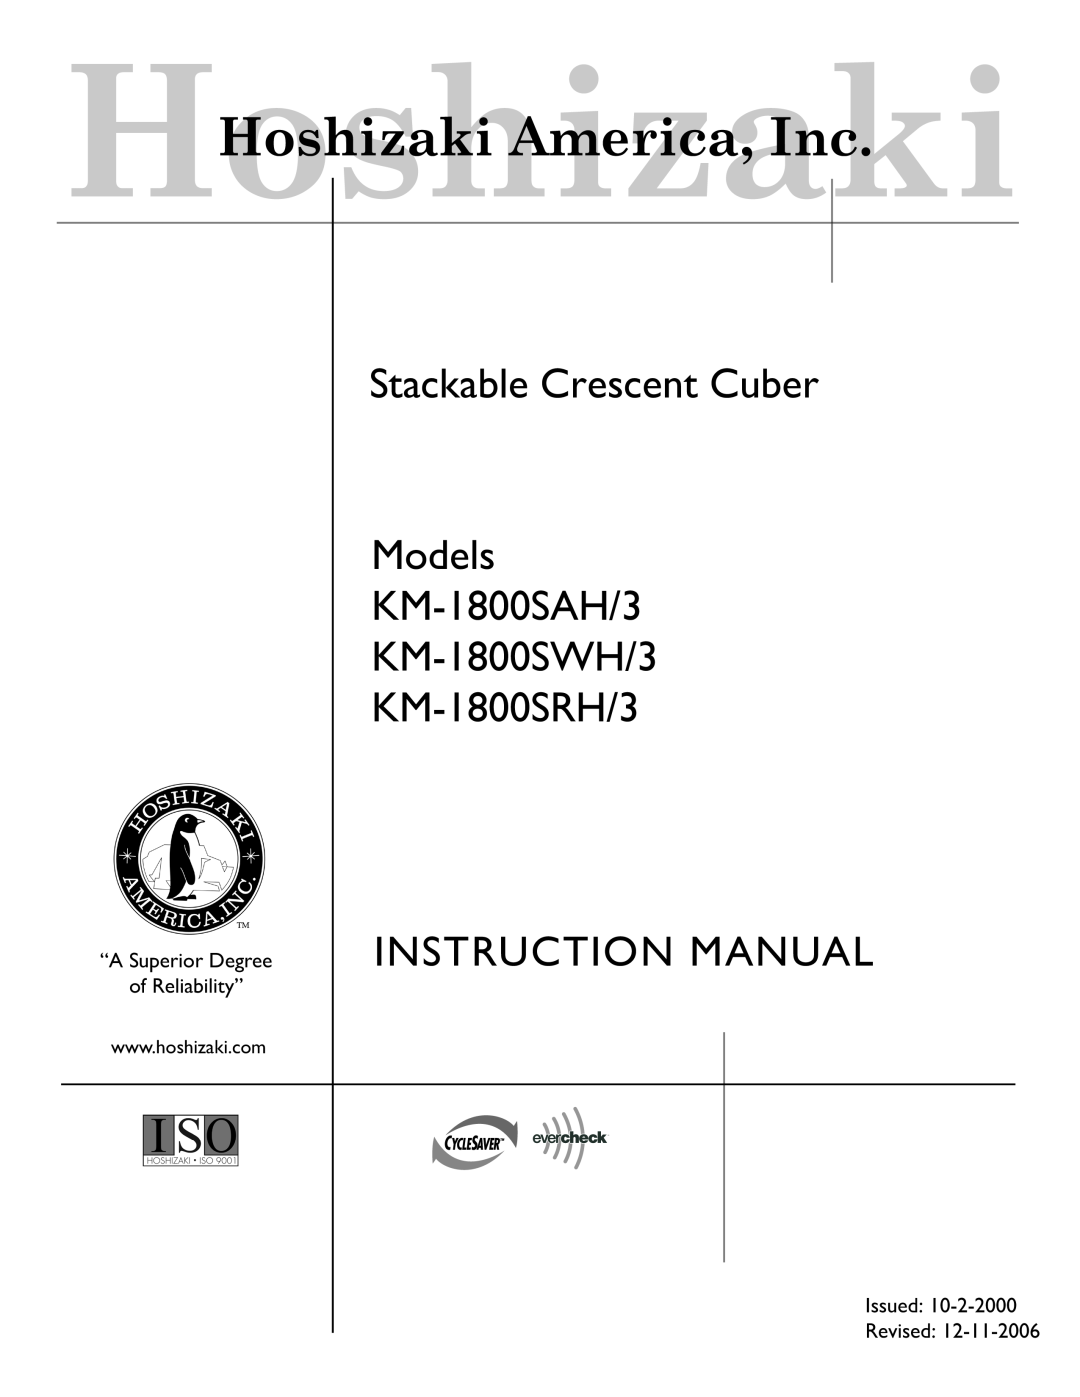 Hoshizaki KM-1800SWH/3, KM-1800SAH/3 instruction manual “A Superior Degree of Reliability”, Issued Revised, KM-1800SRH/3 